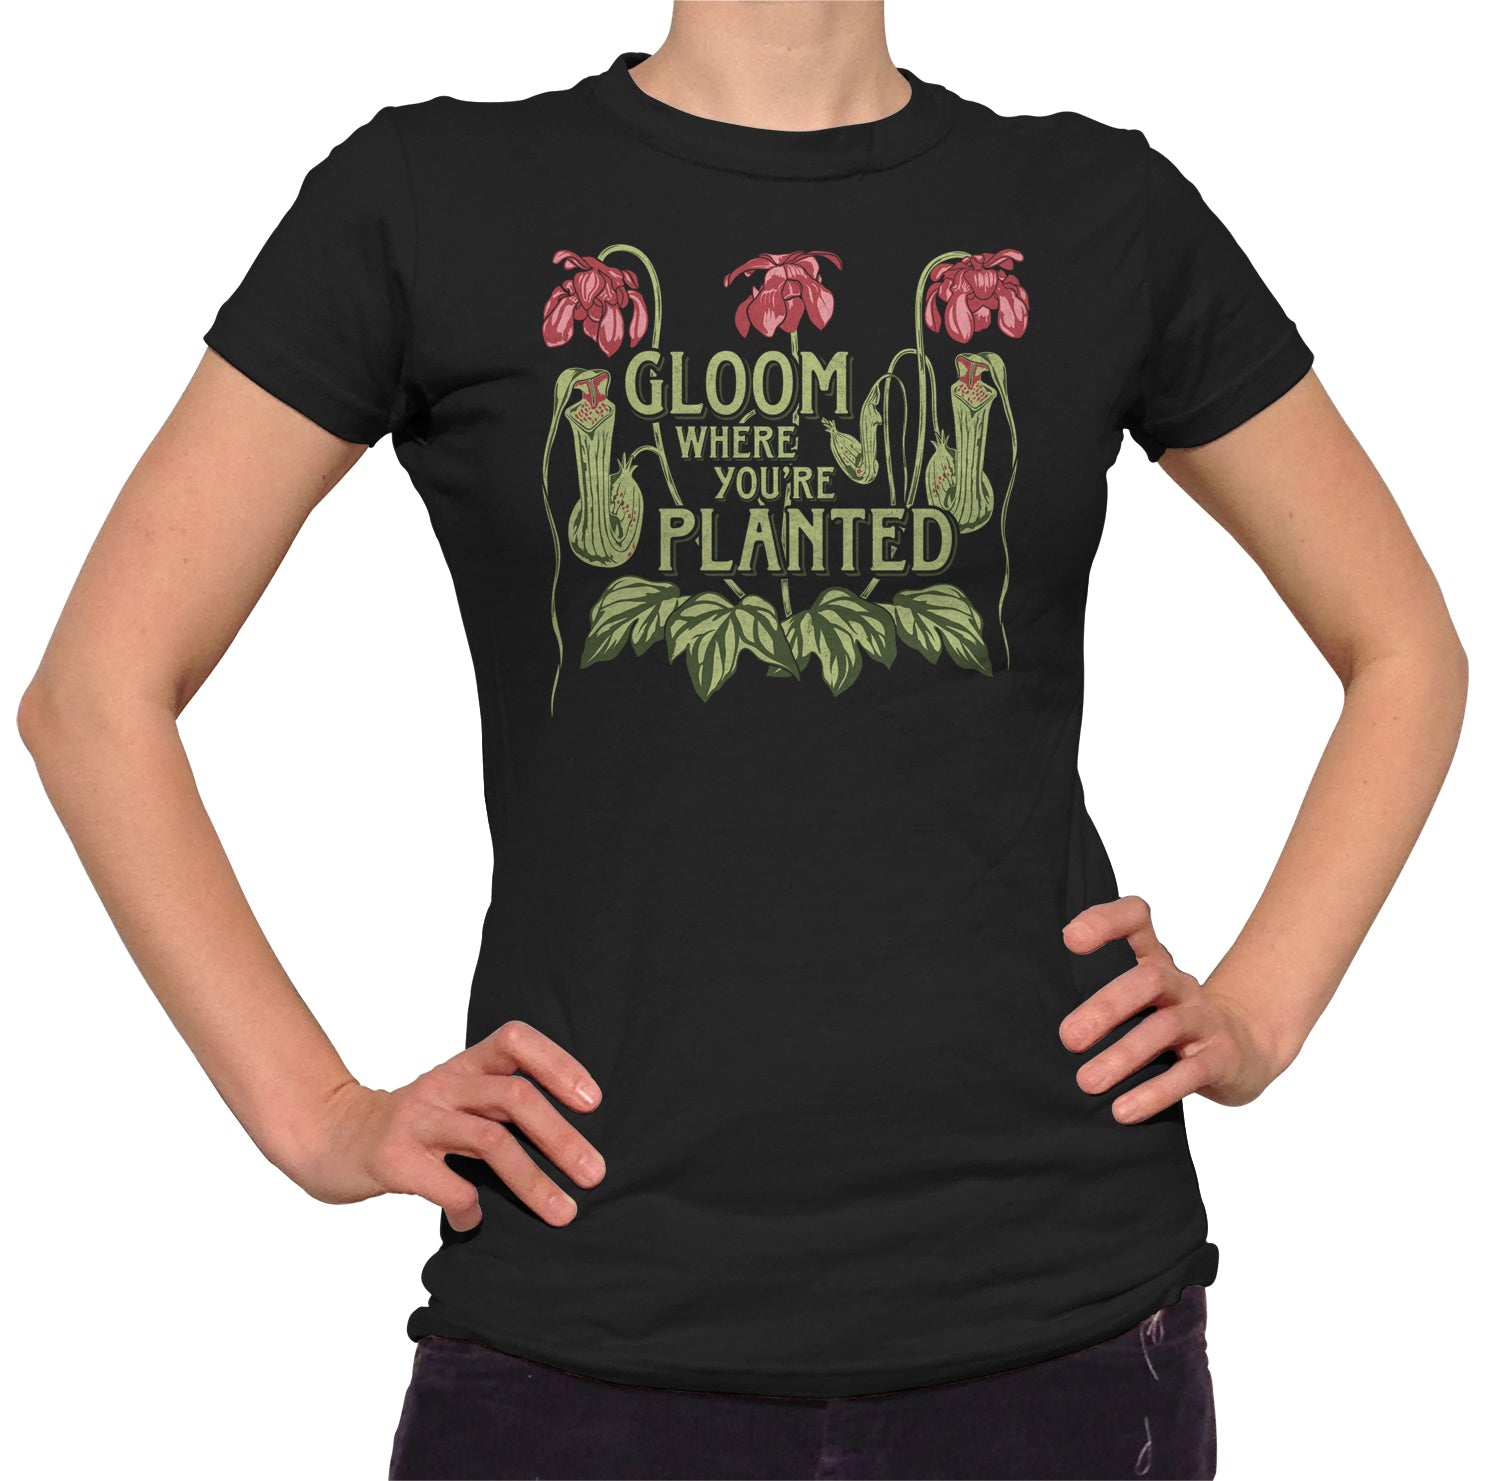 Women's Gloom Where You're Planted T-Shirt